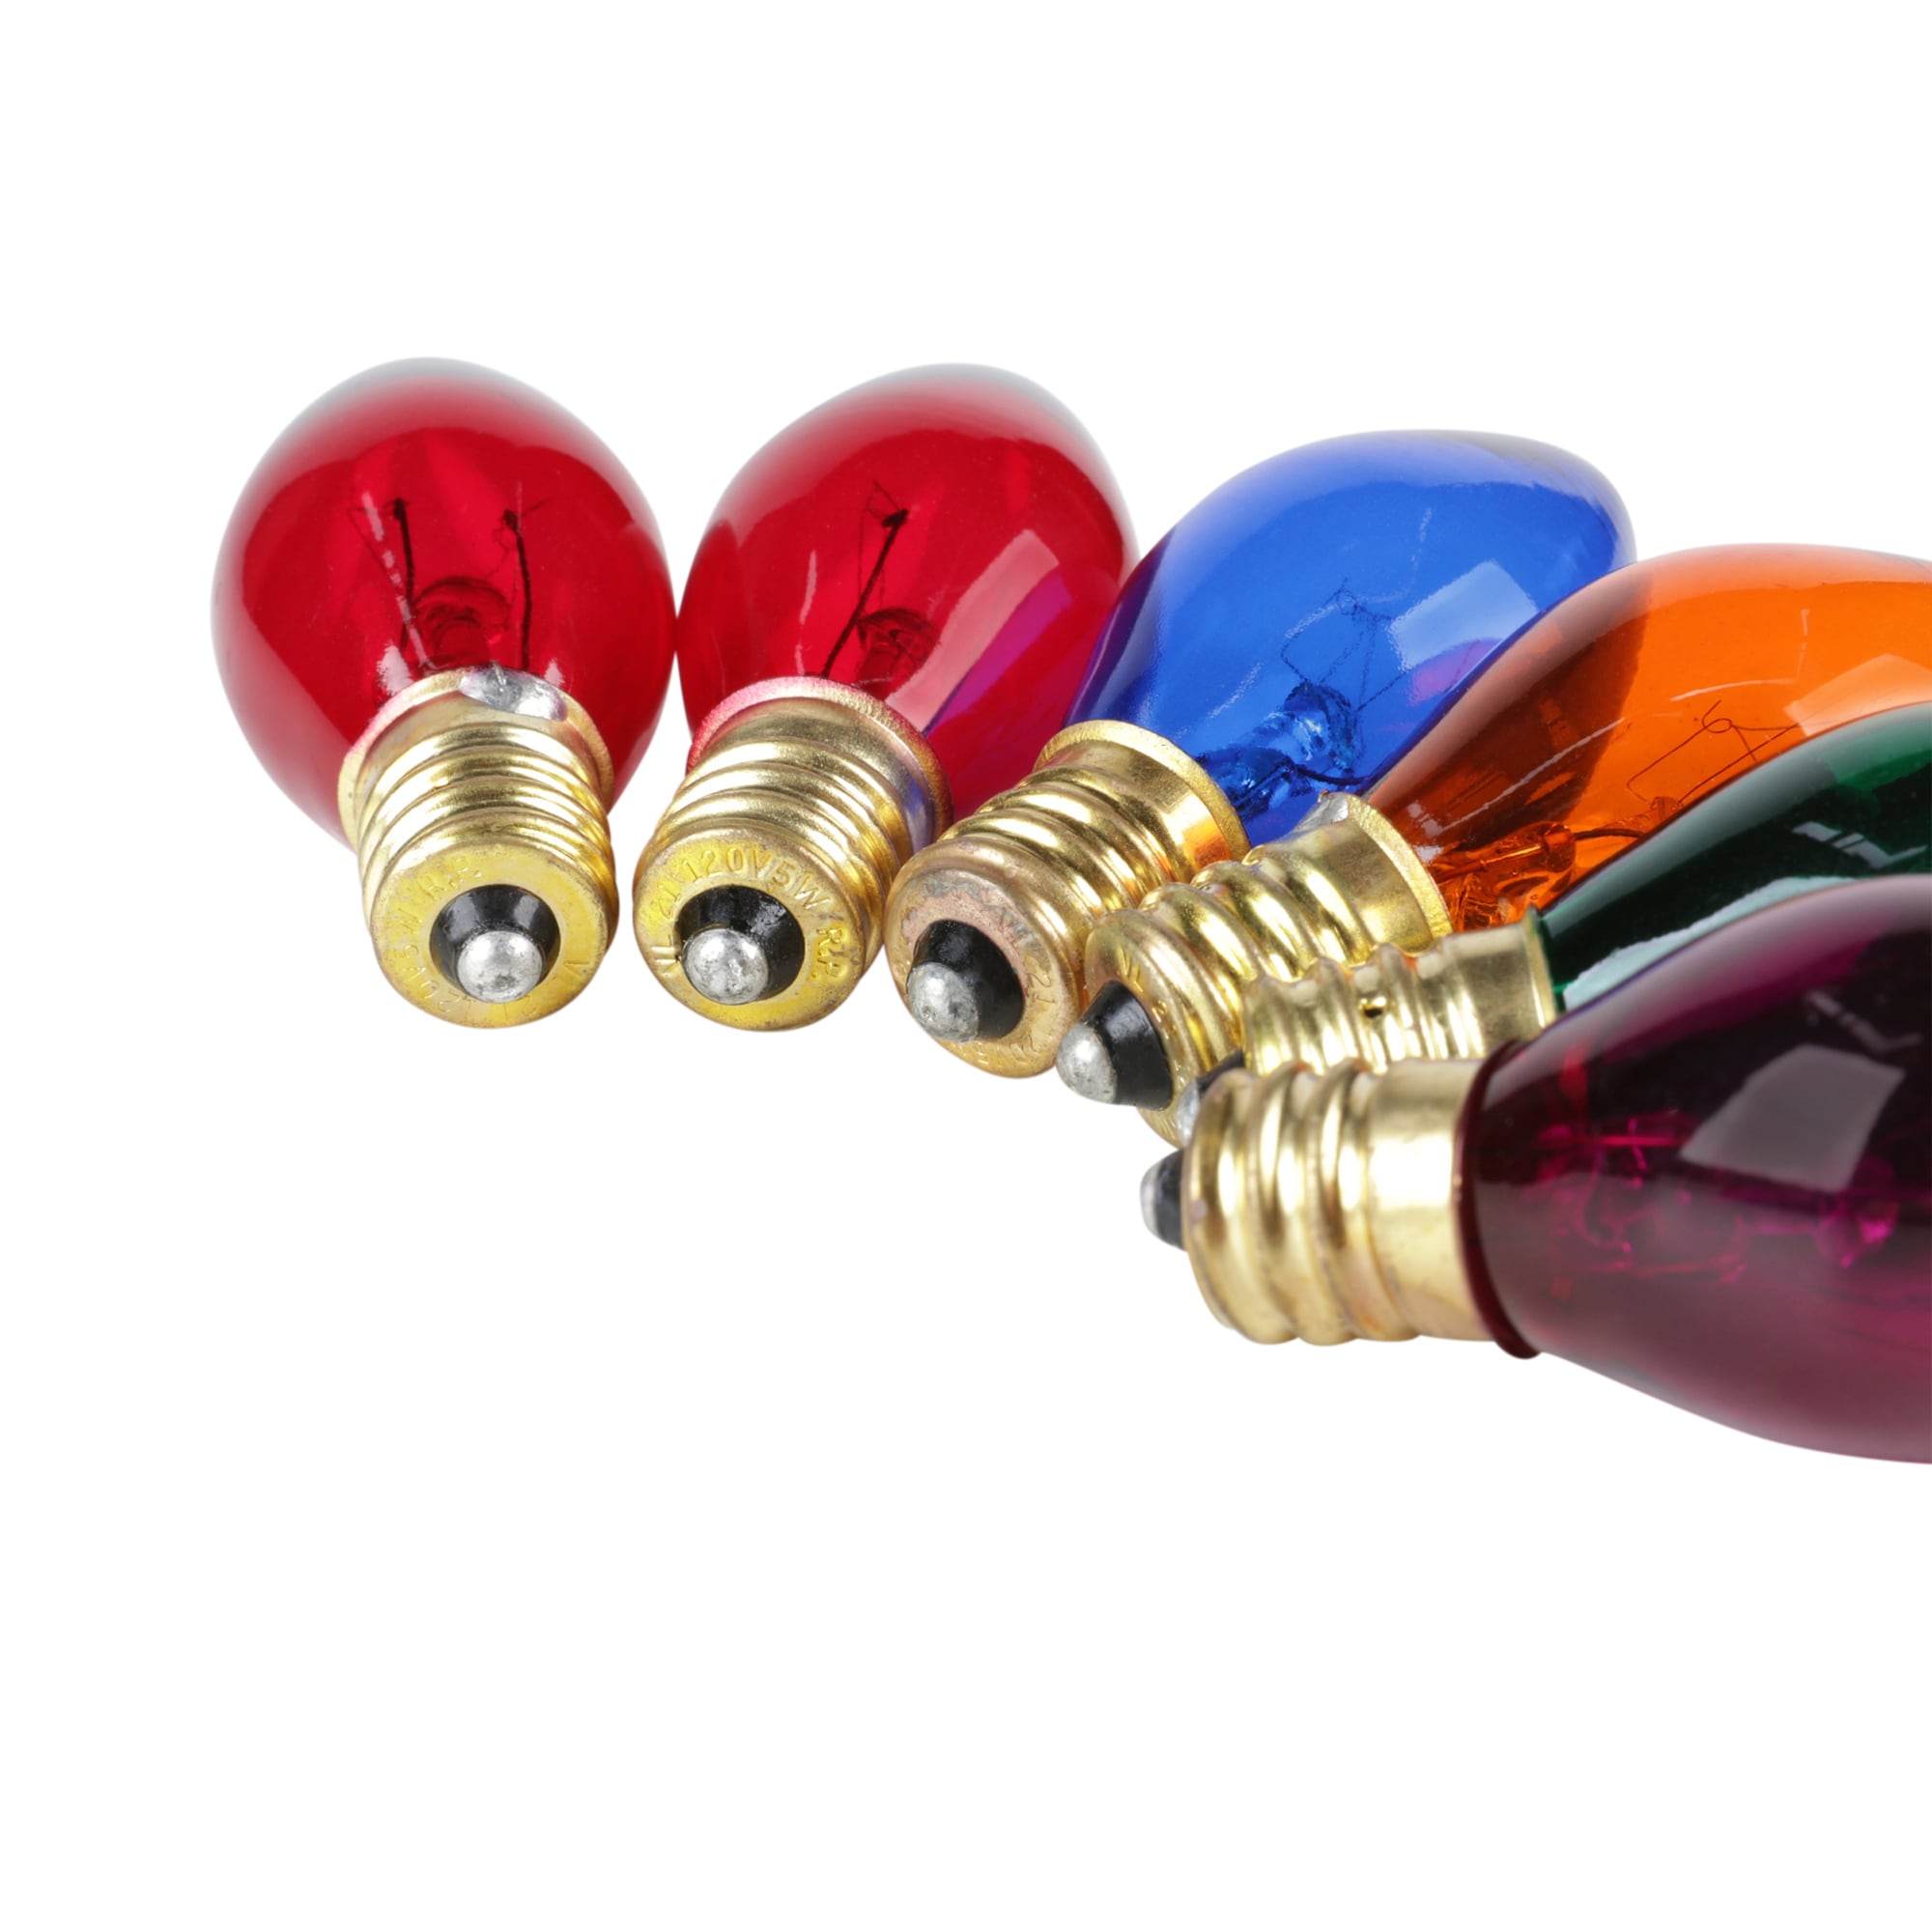 GE String-A-Long Multicolor Incandescent C9 String Light Bulbs at